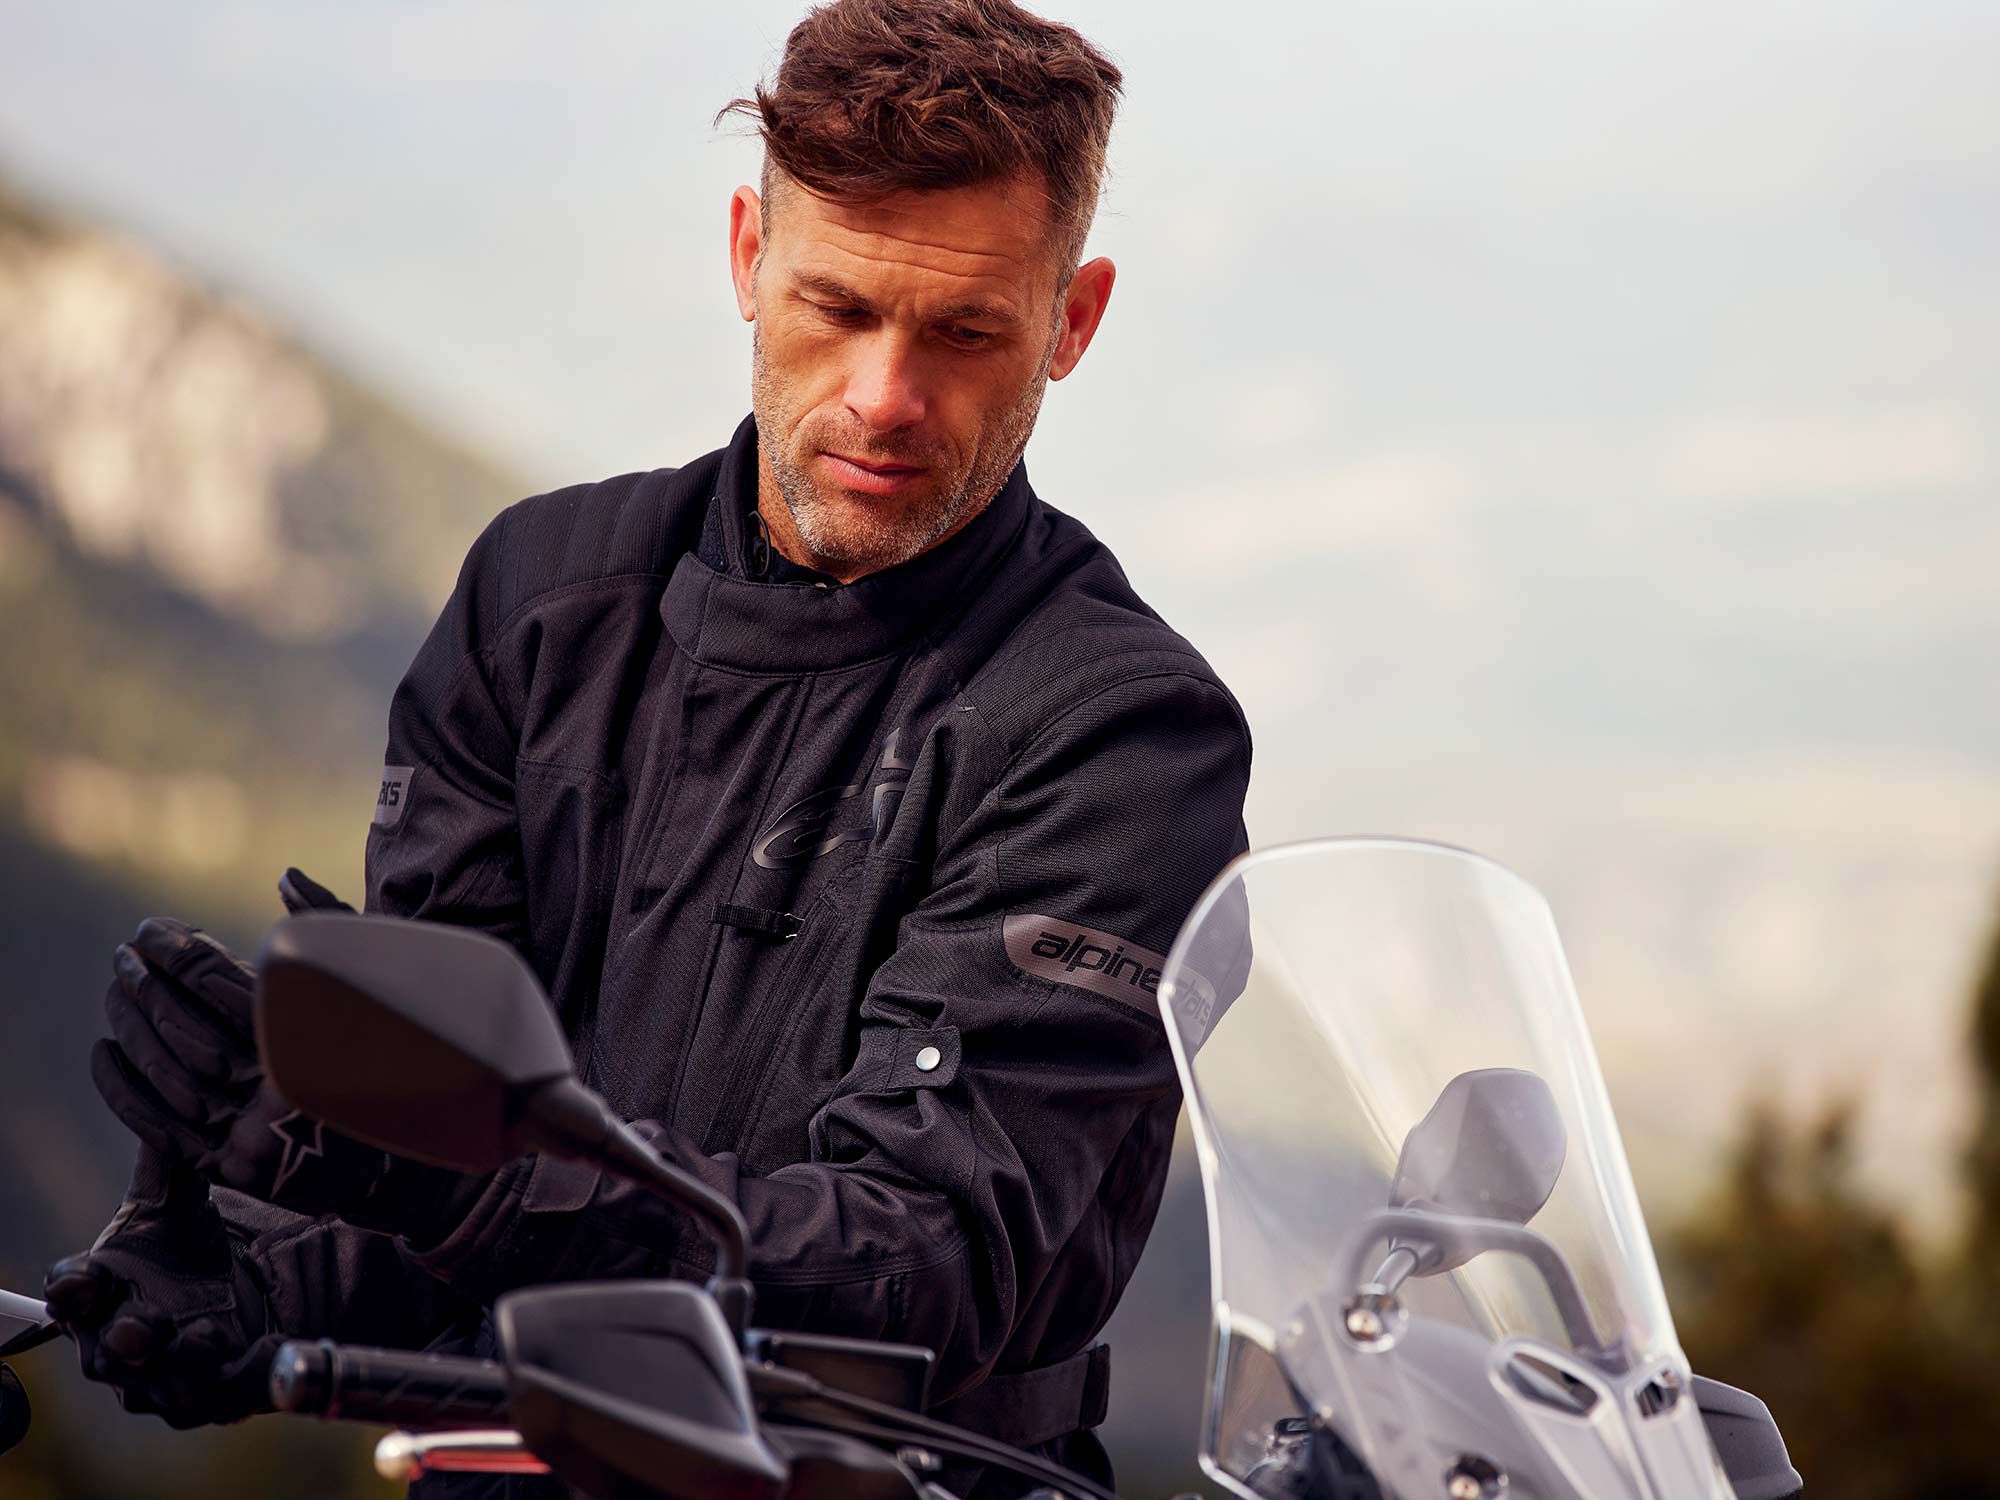 The CB500X’s windscreen has two available height settings—56.9 inches and 55.5 inches—but requires tools to be adjusted.